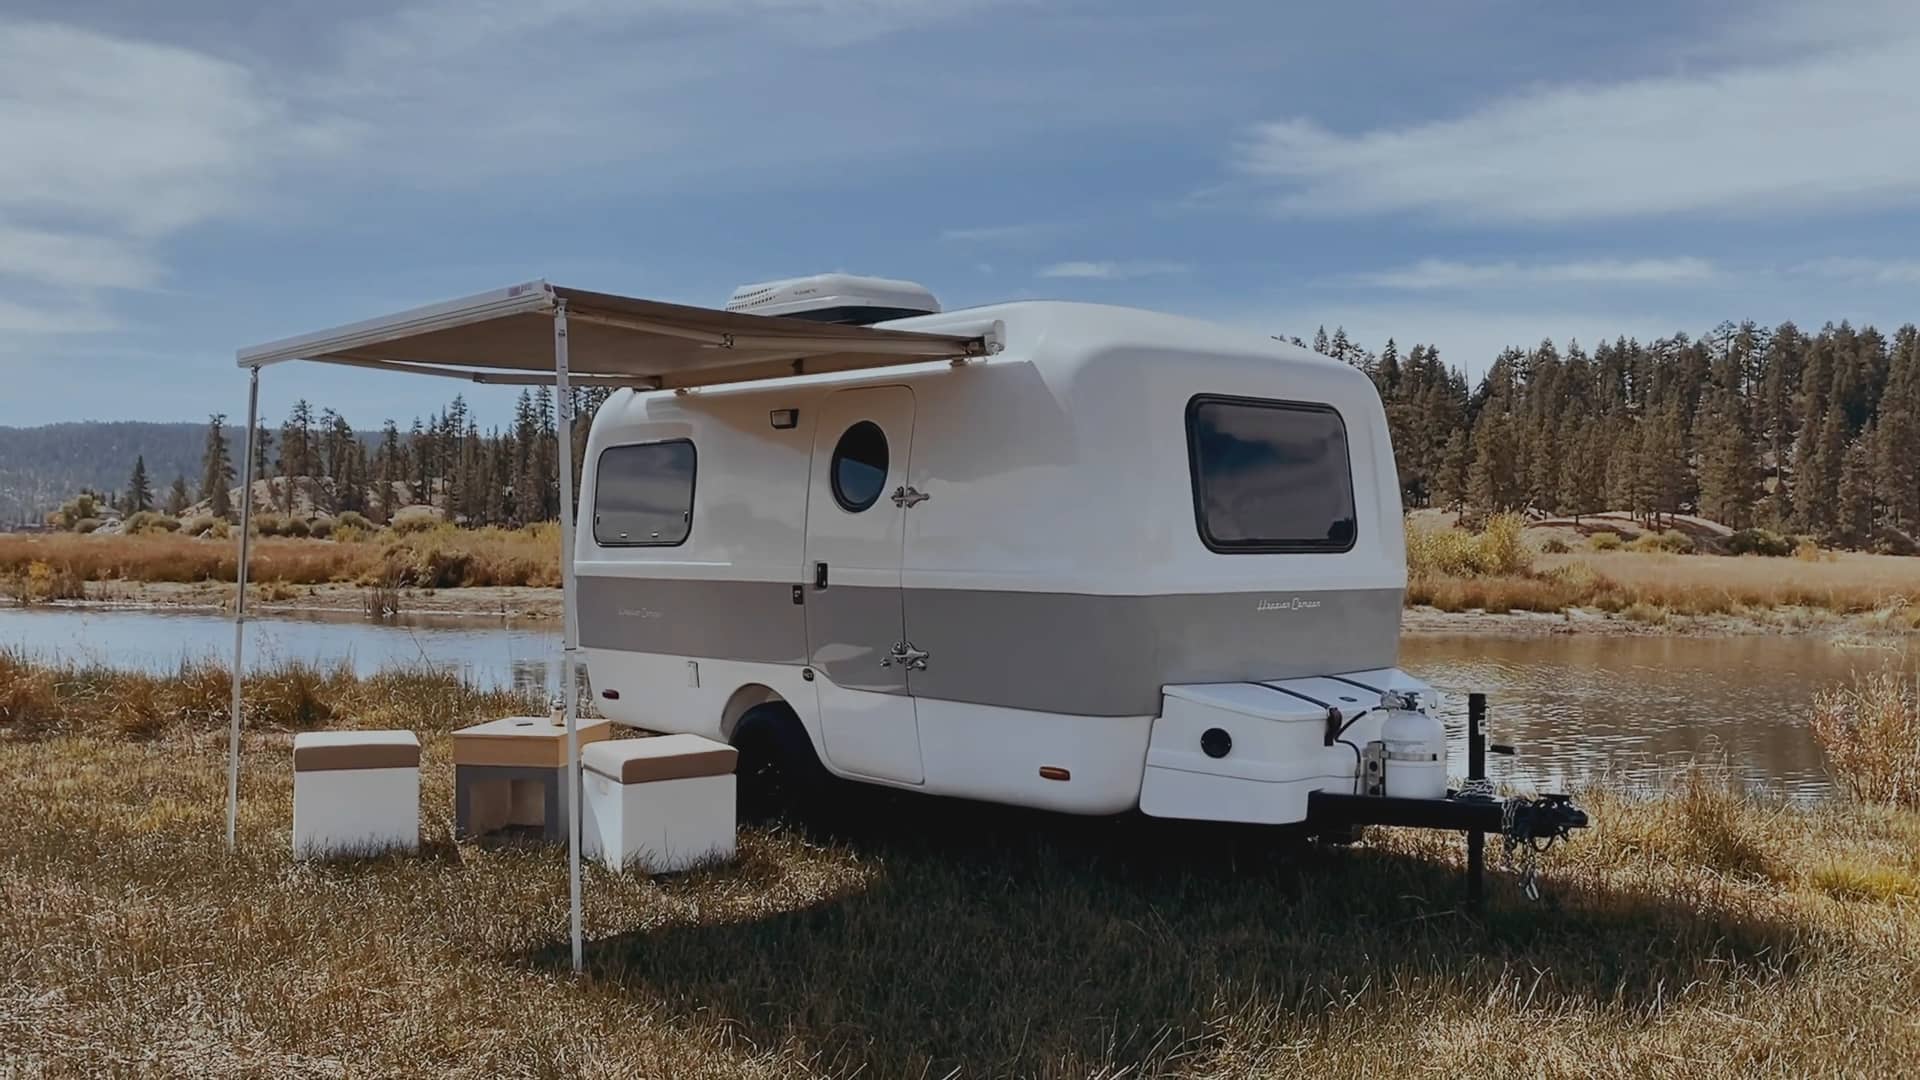 Adaptiv™ for Traveler (HCT) by Happier Camper on Vimeo